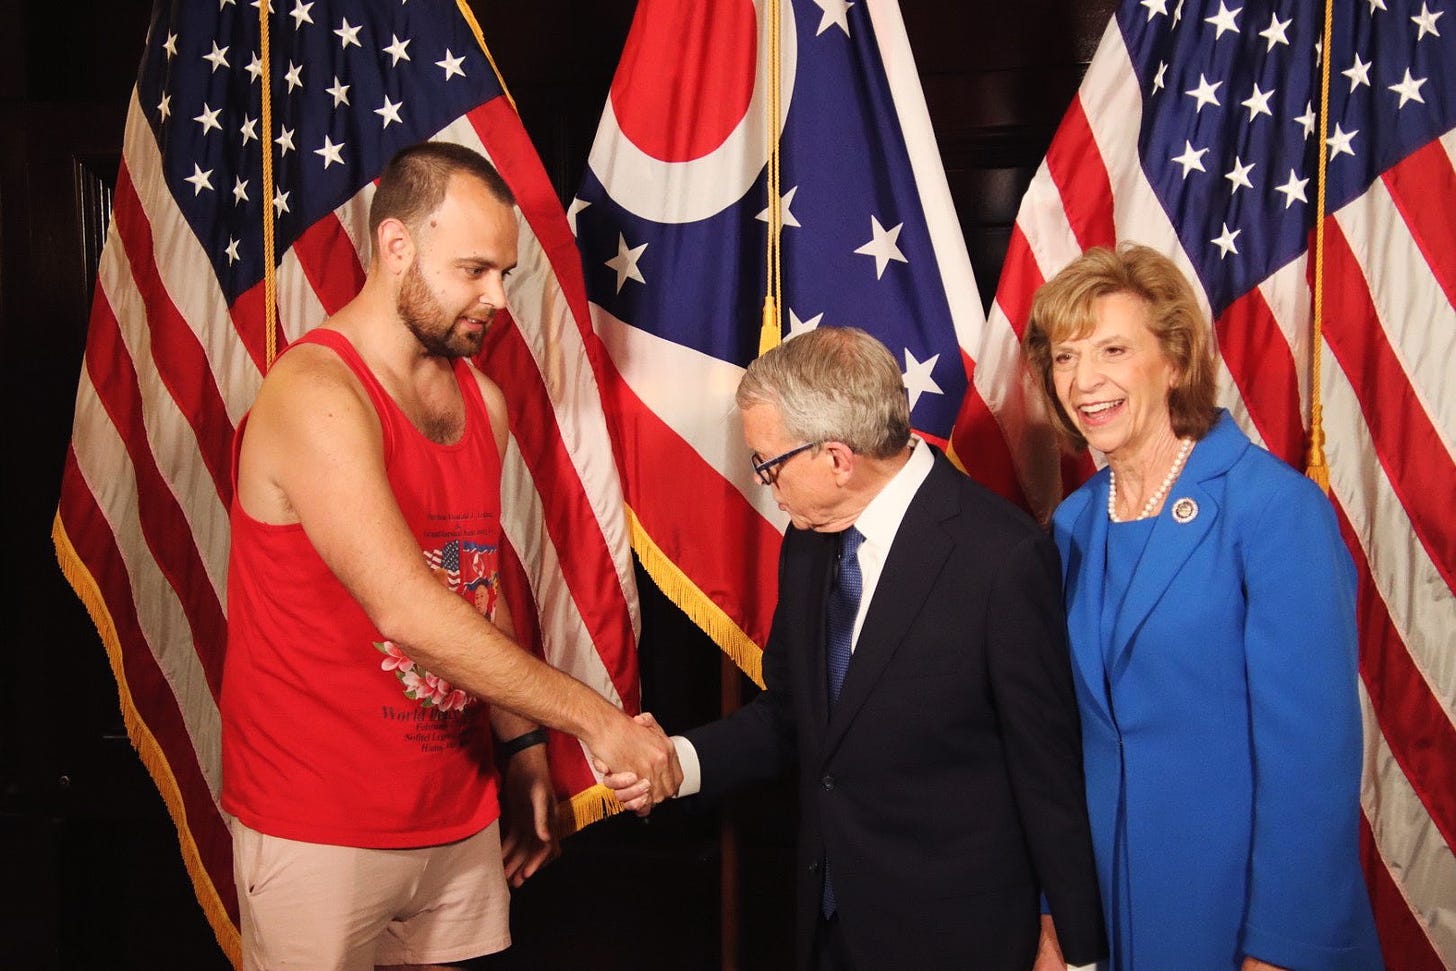 D.J. Byrnes, owner and operator of The Rooster, shakes hands with Ohio governor Mike DeWine while his wife, Fran, looks at reporters.